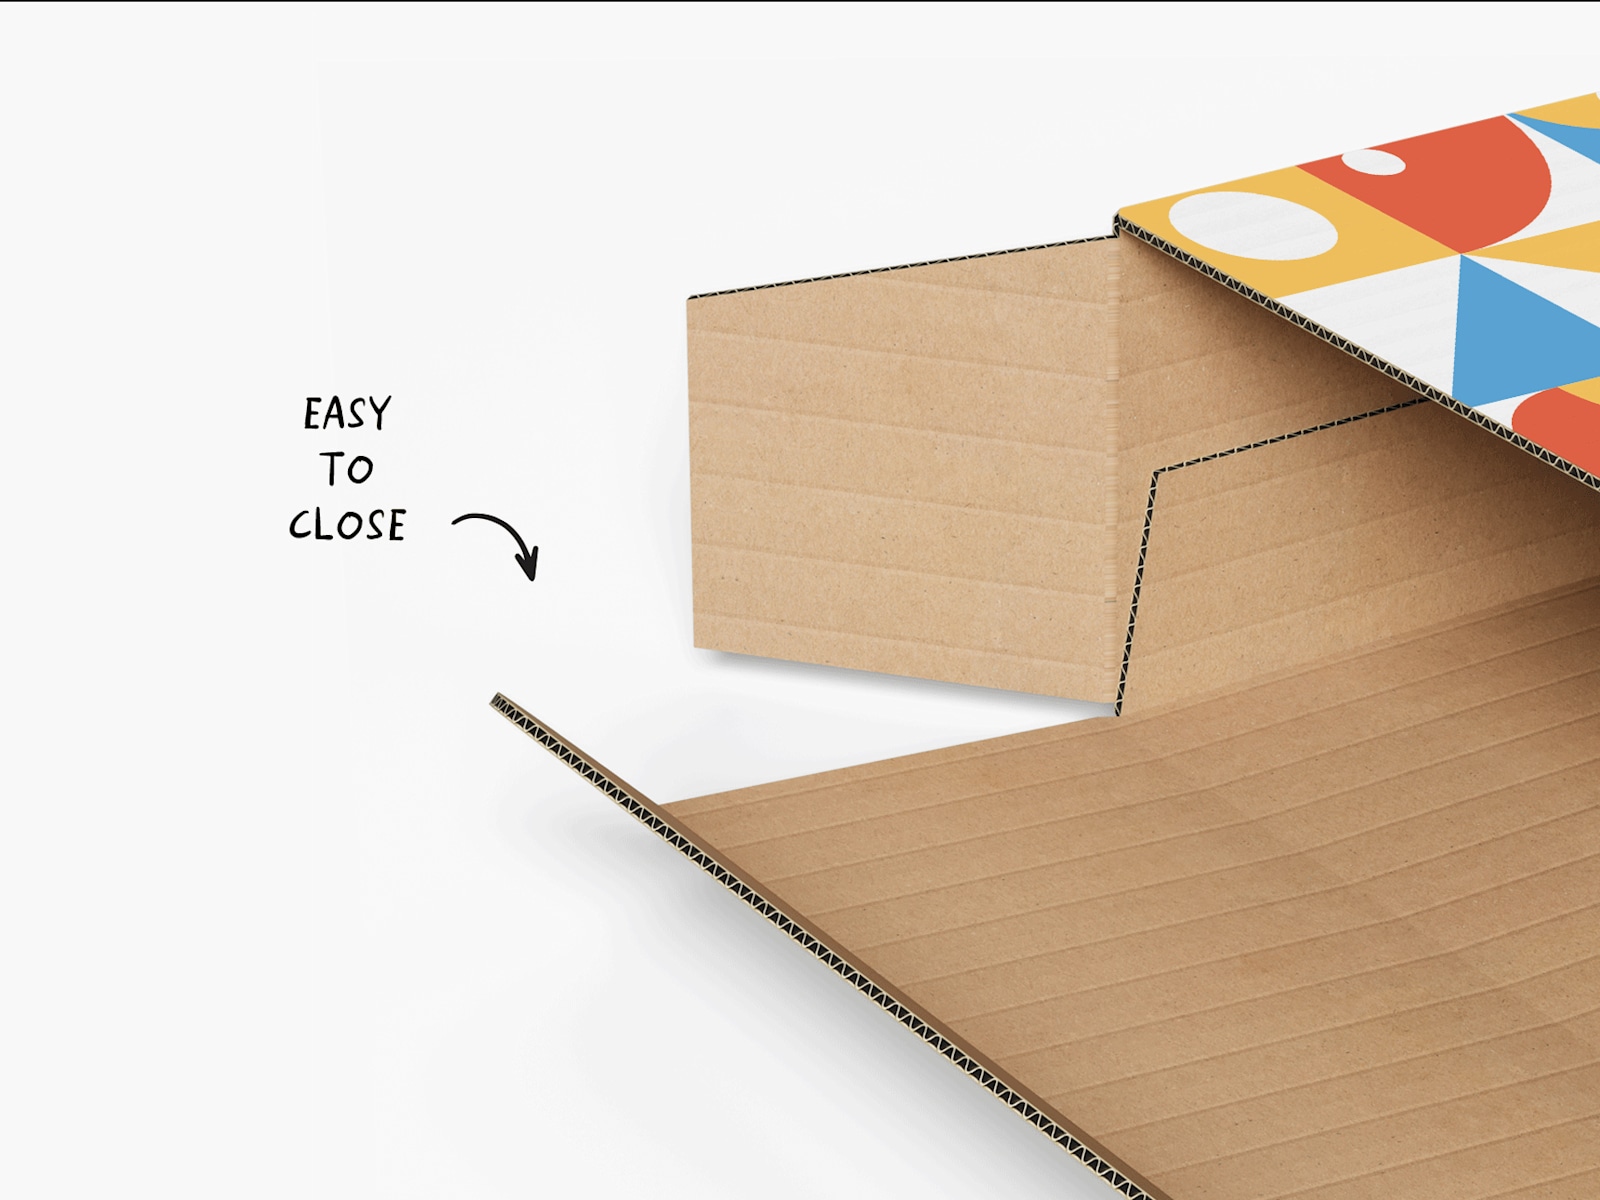 A flat shipping boxes are easy to close and secure with a single piece of tape.